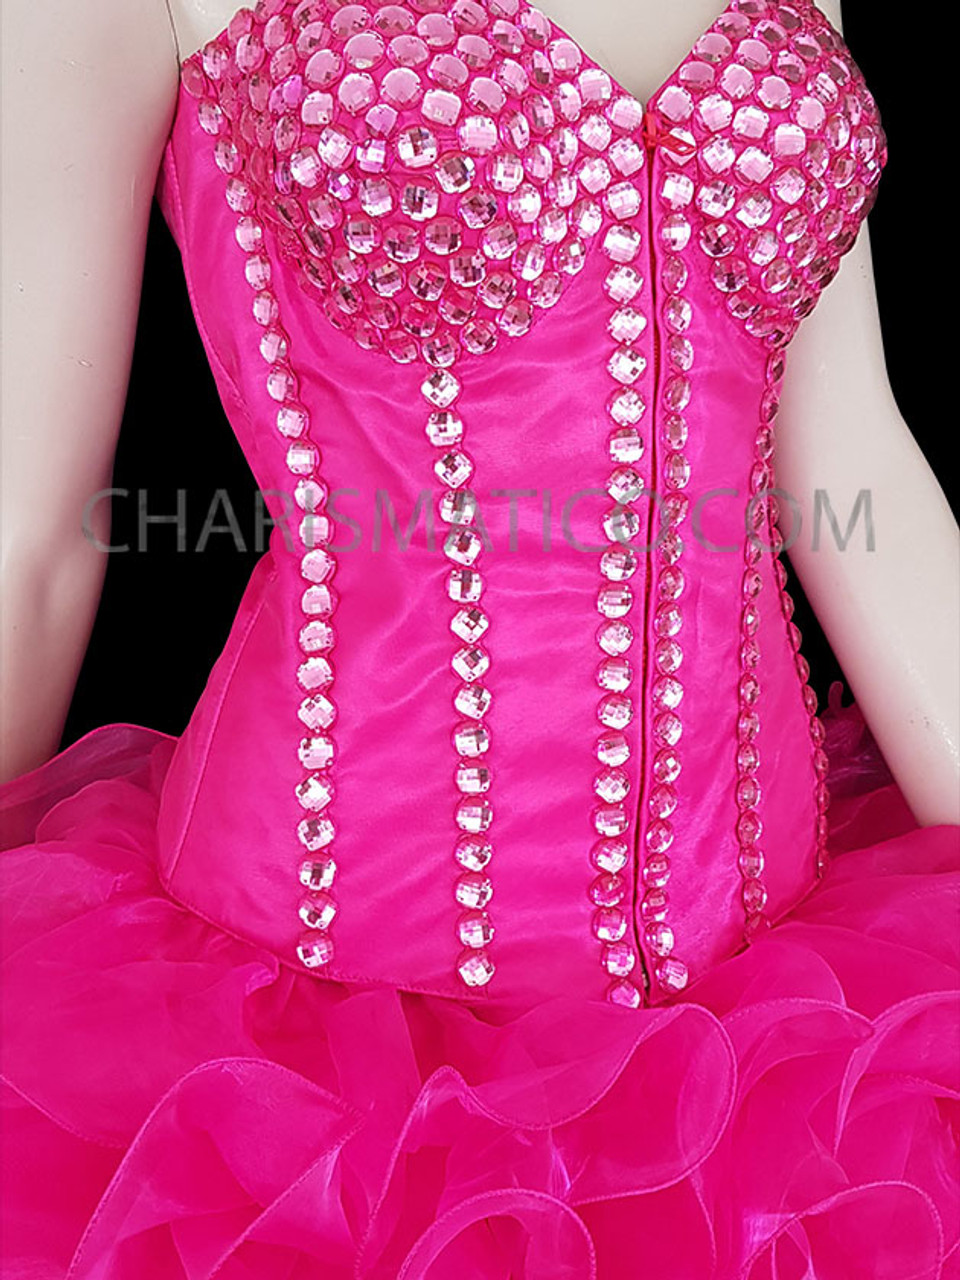 Burlesque Embroidered Hot Pink Corset With Organza Ruffle Skirt